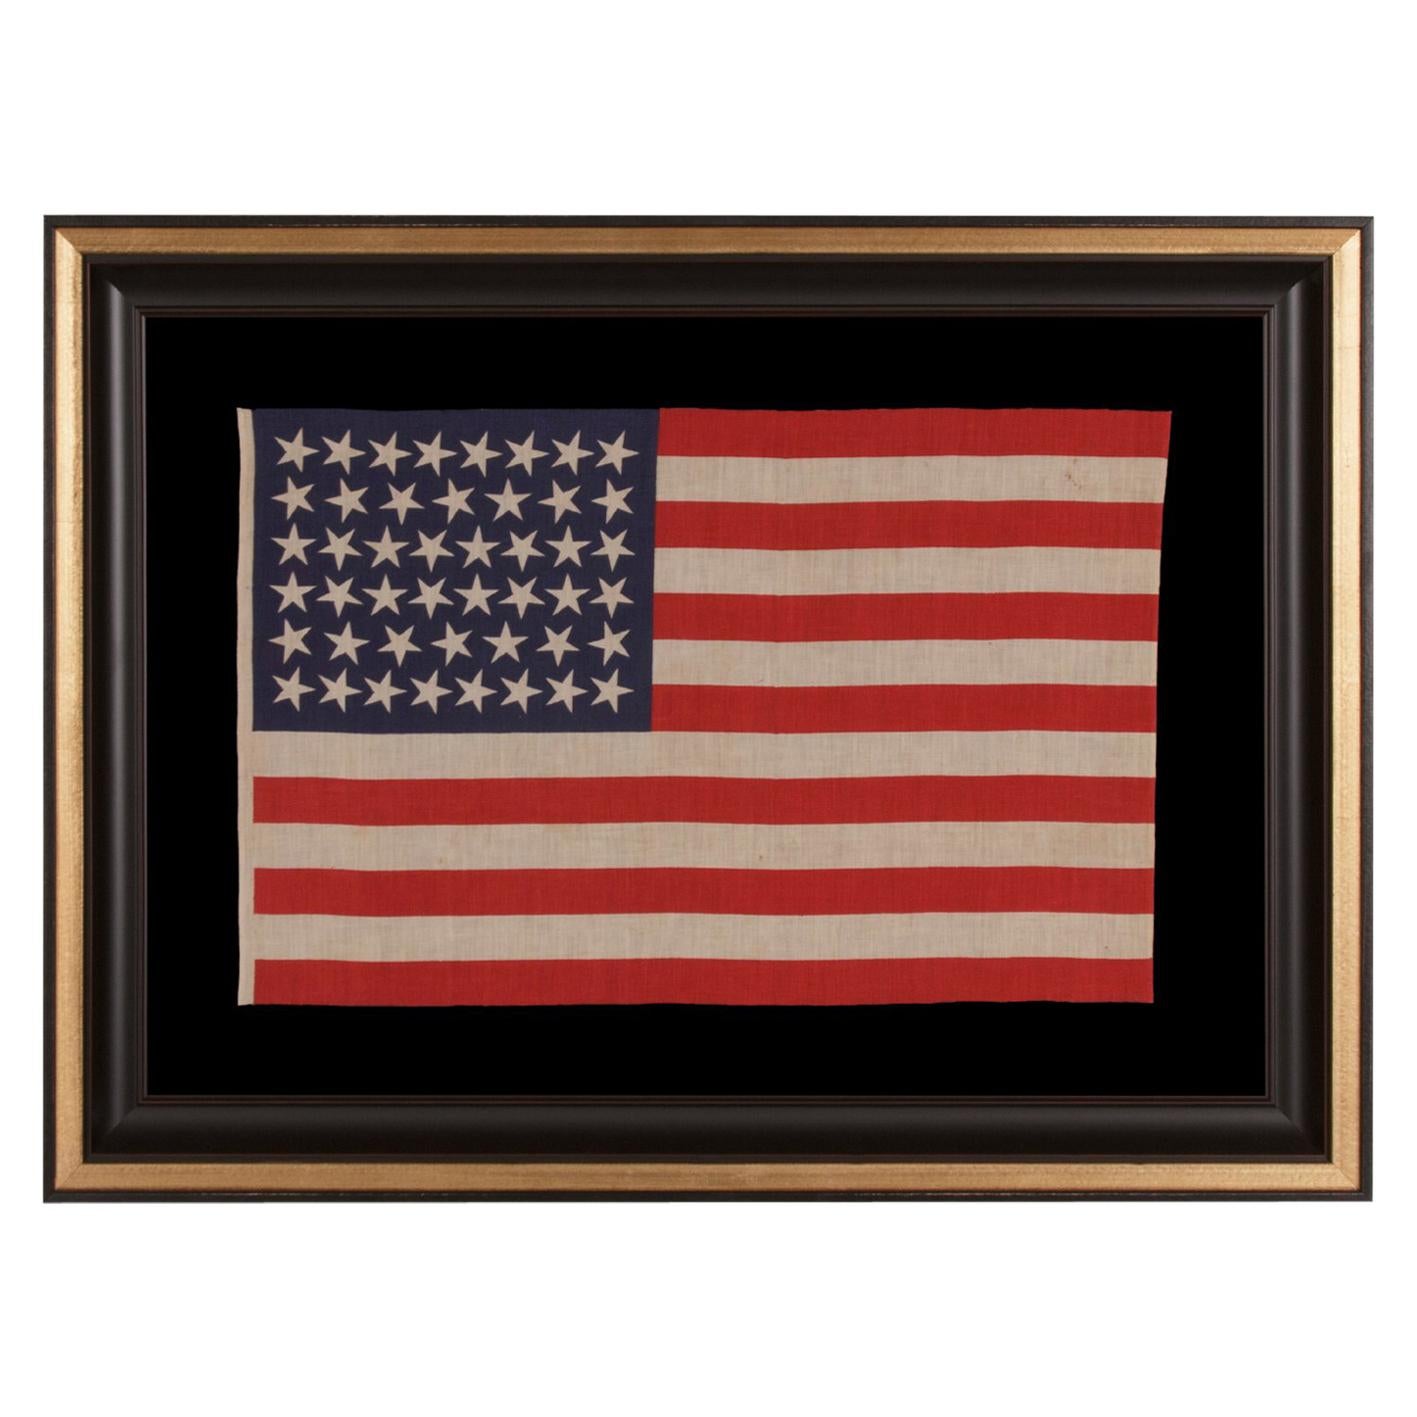 46 Stars with Varied Star Positioning on an Antique American Flag